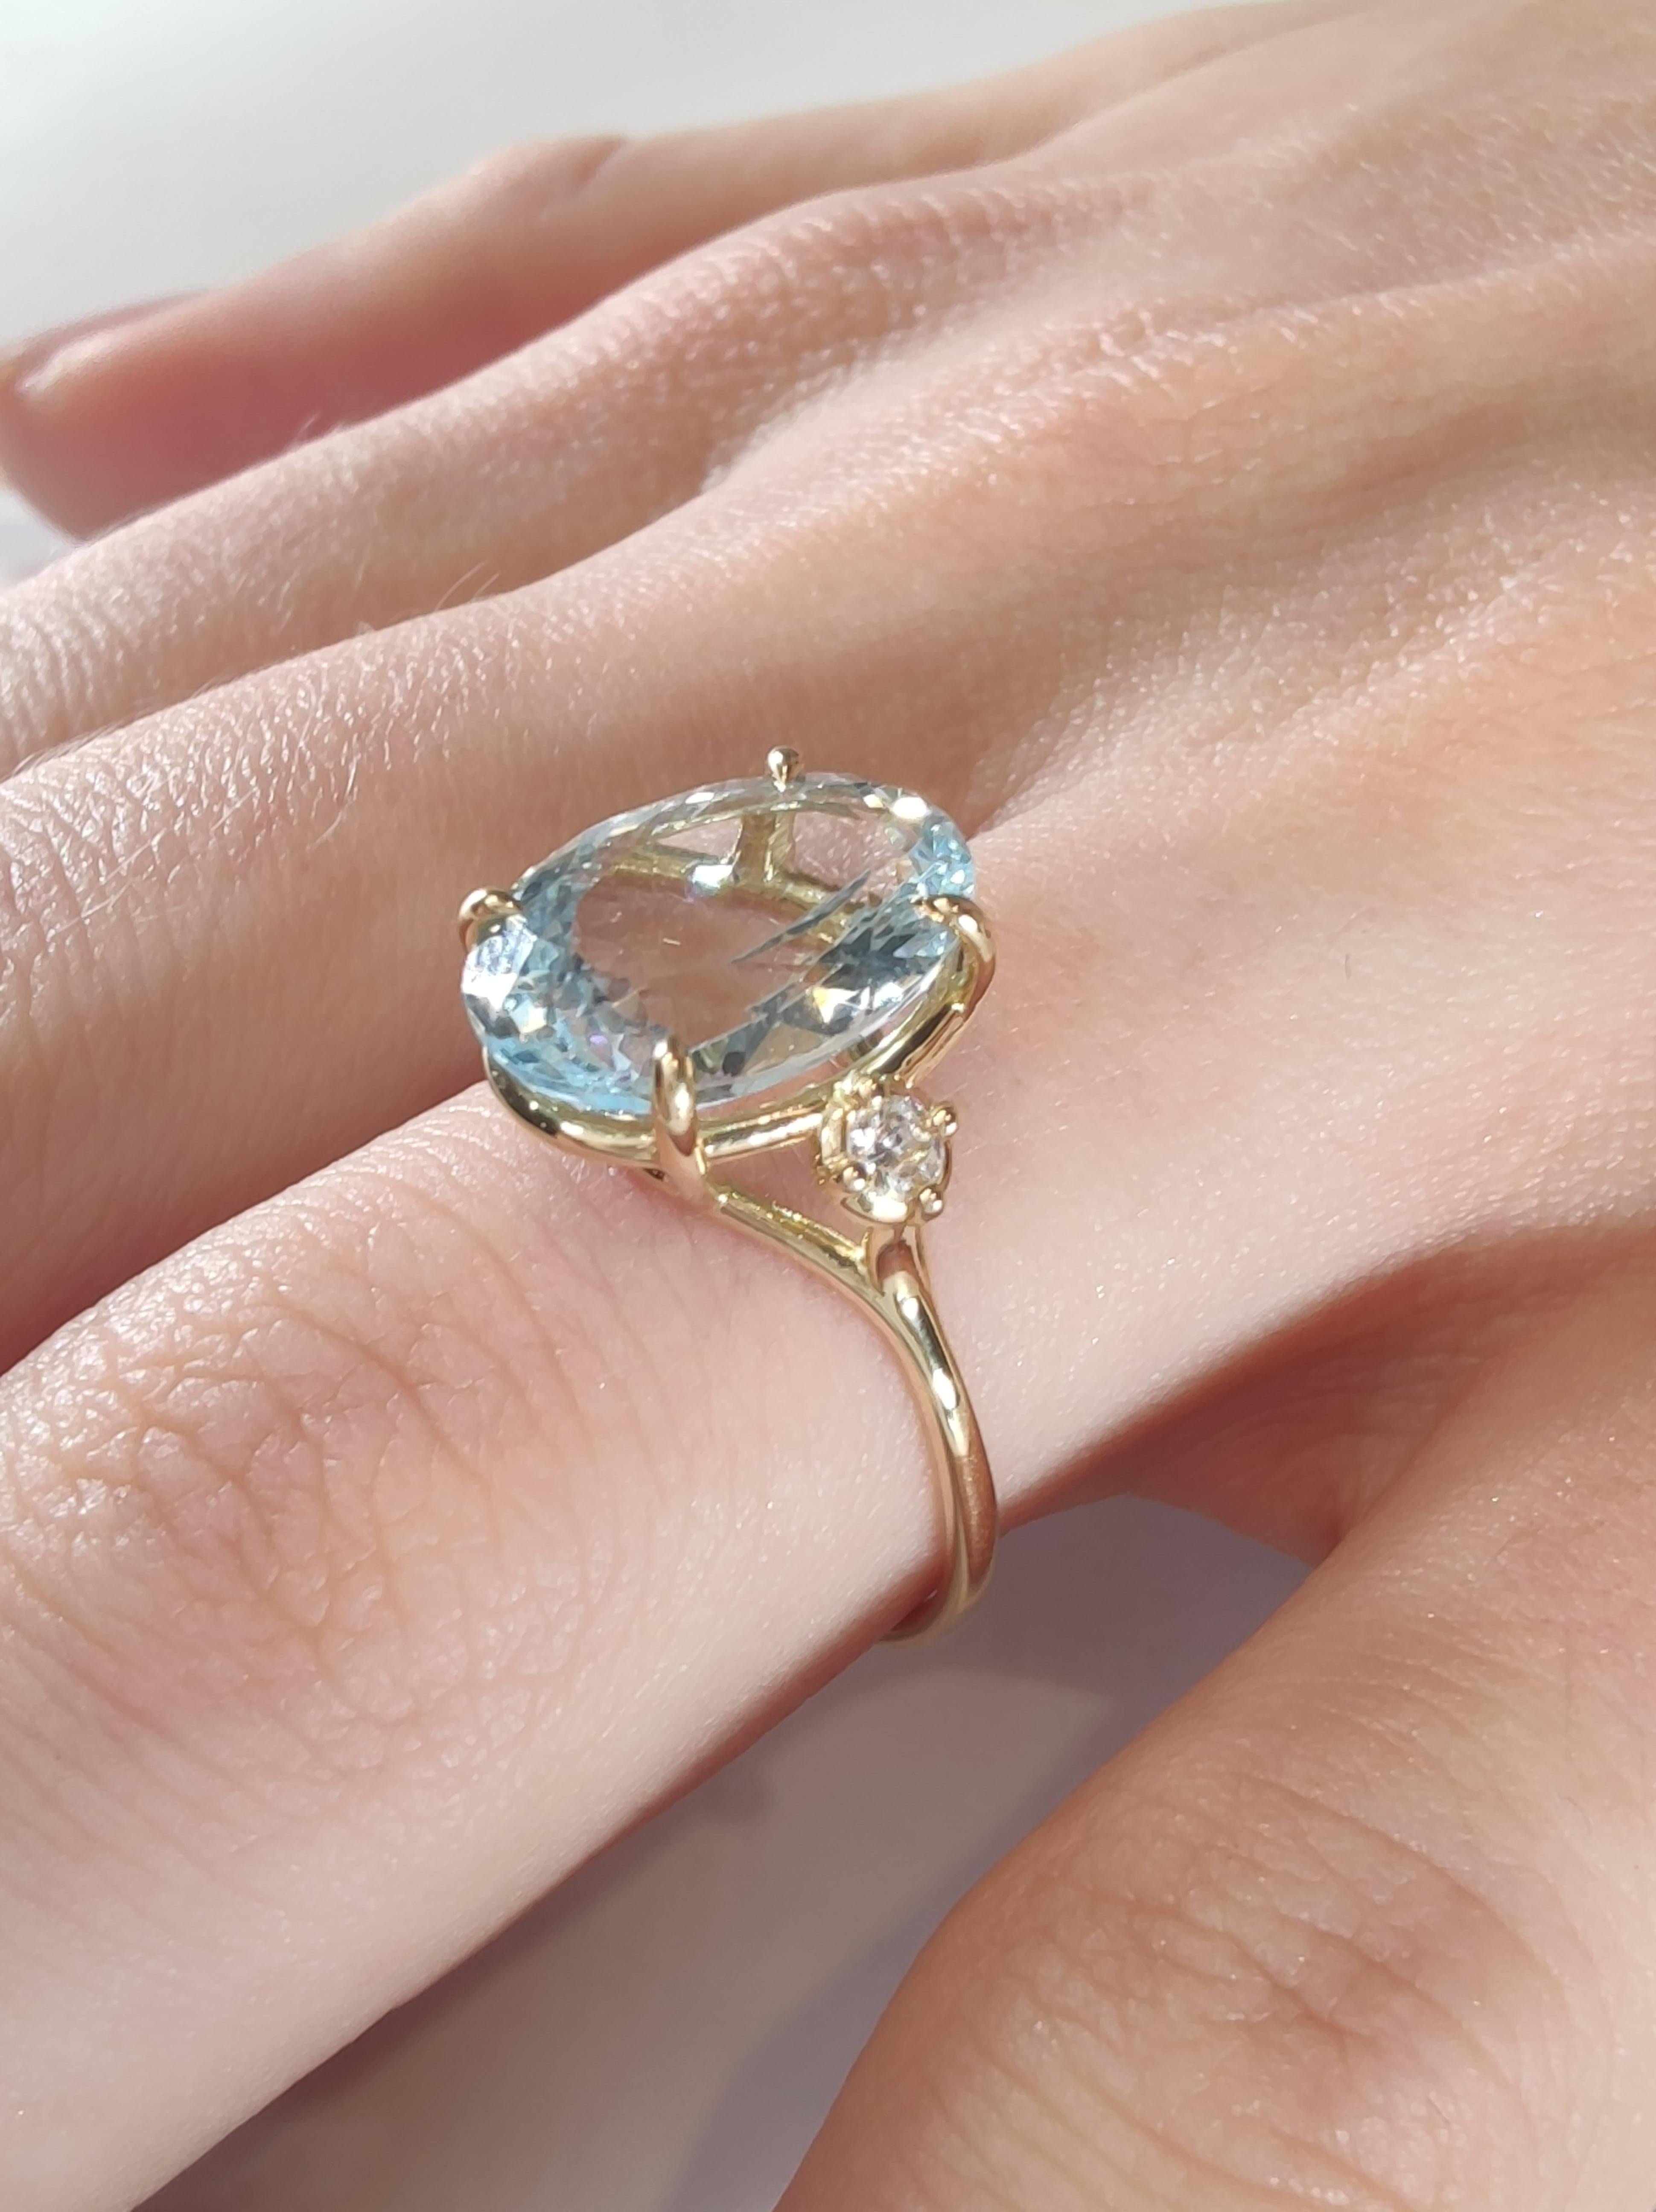 3, 93ct Oval Cut Aquamarine Engagement Ring, 18k Yellow Gold - Resizable In New Condition For Sale In Sant Josep de sa Talaia, IB